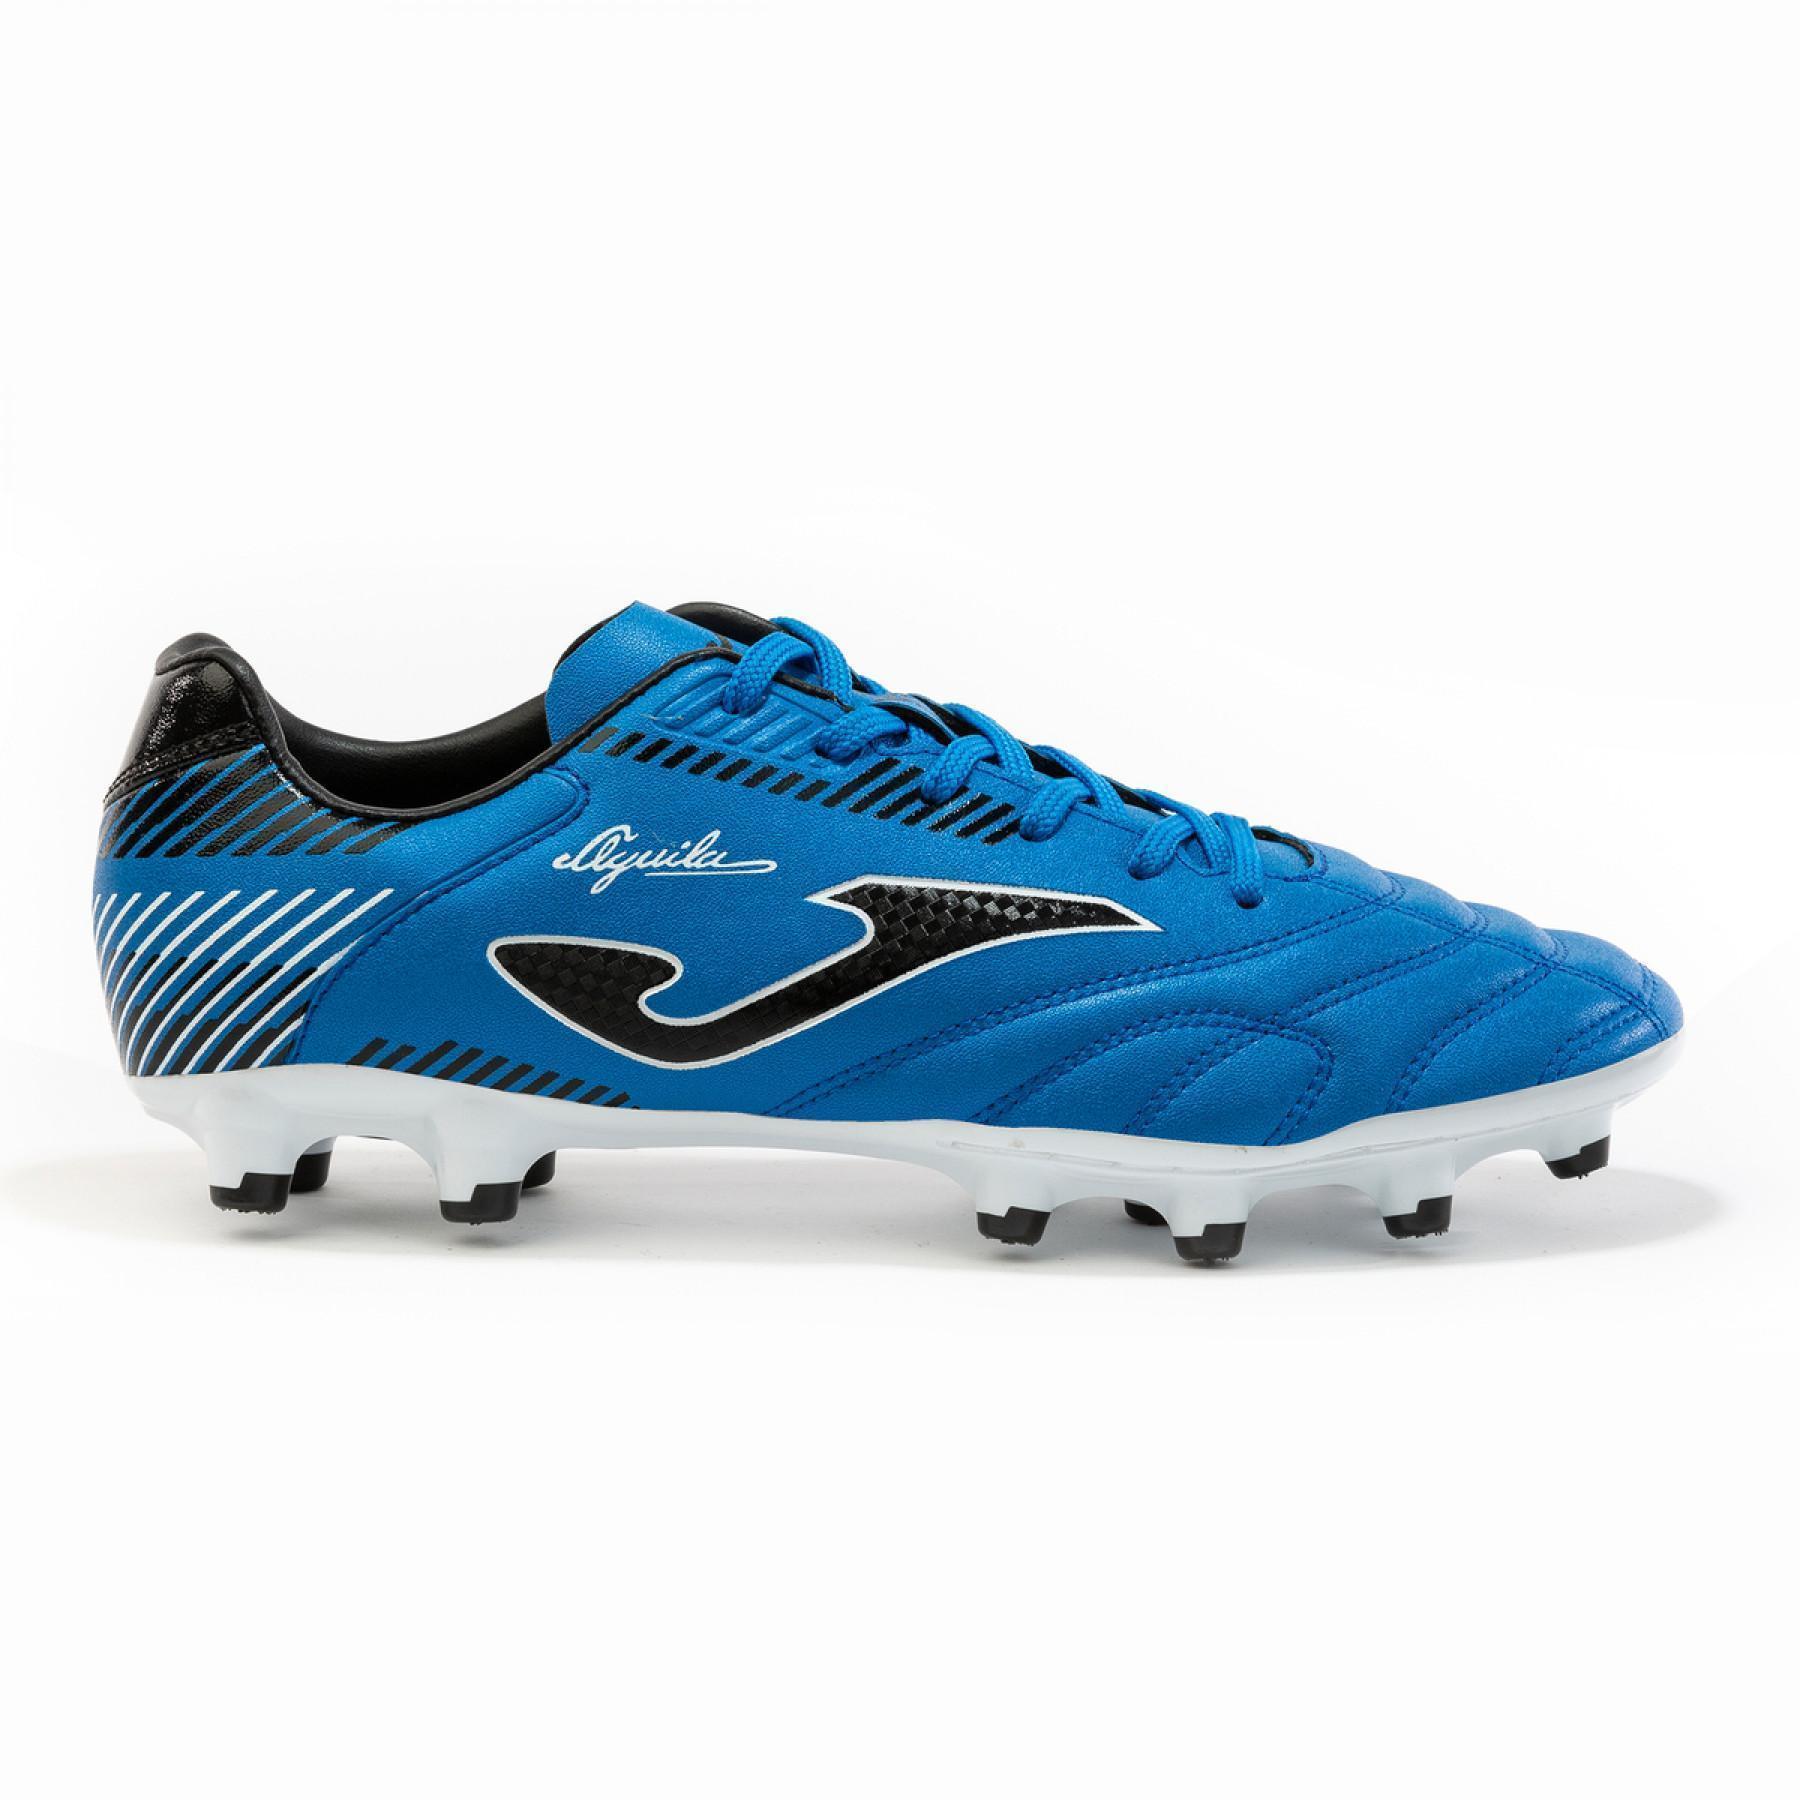 Chaussures Joma Aguila FG 2004